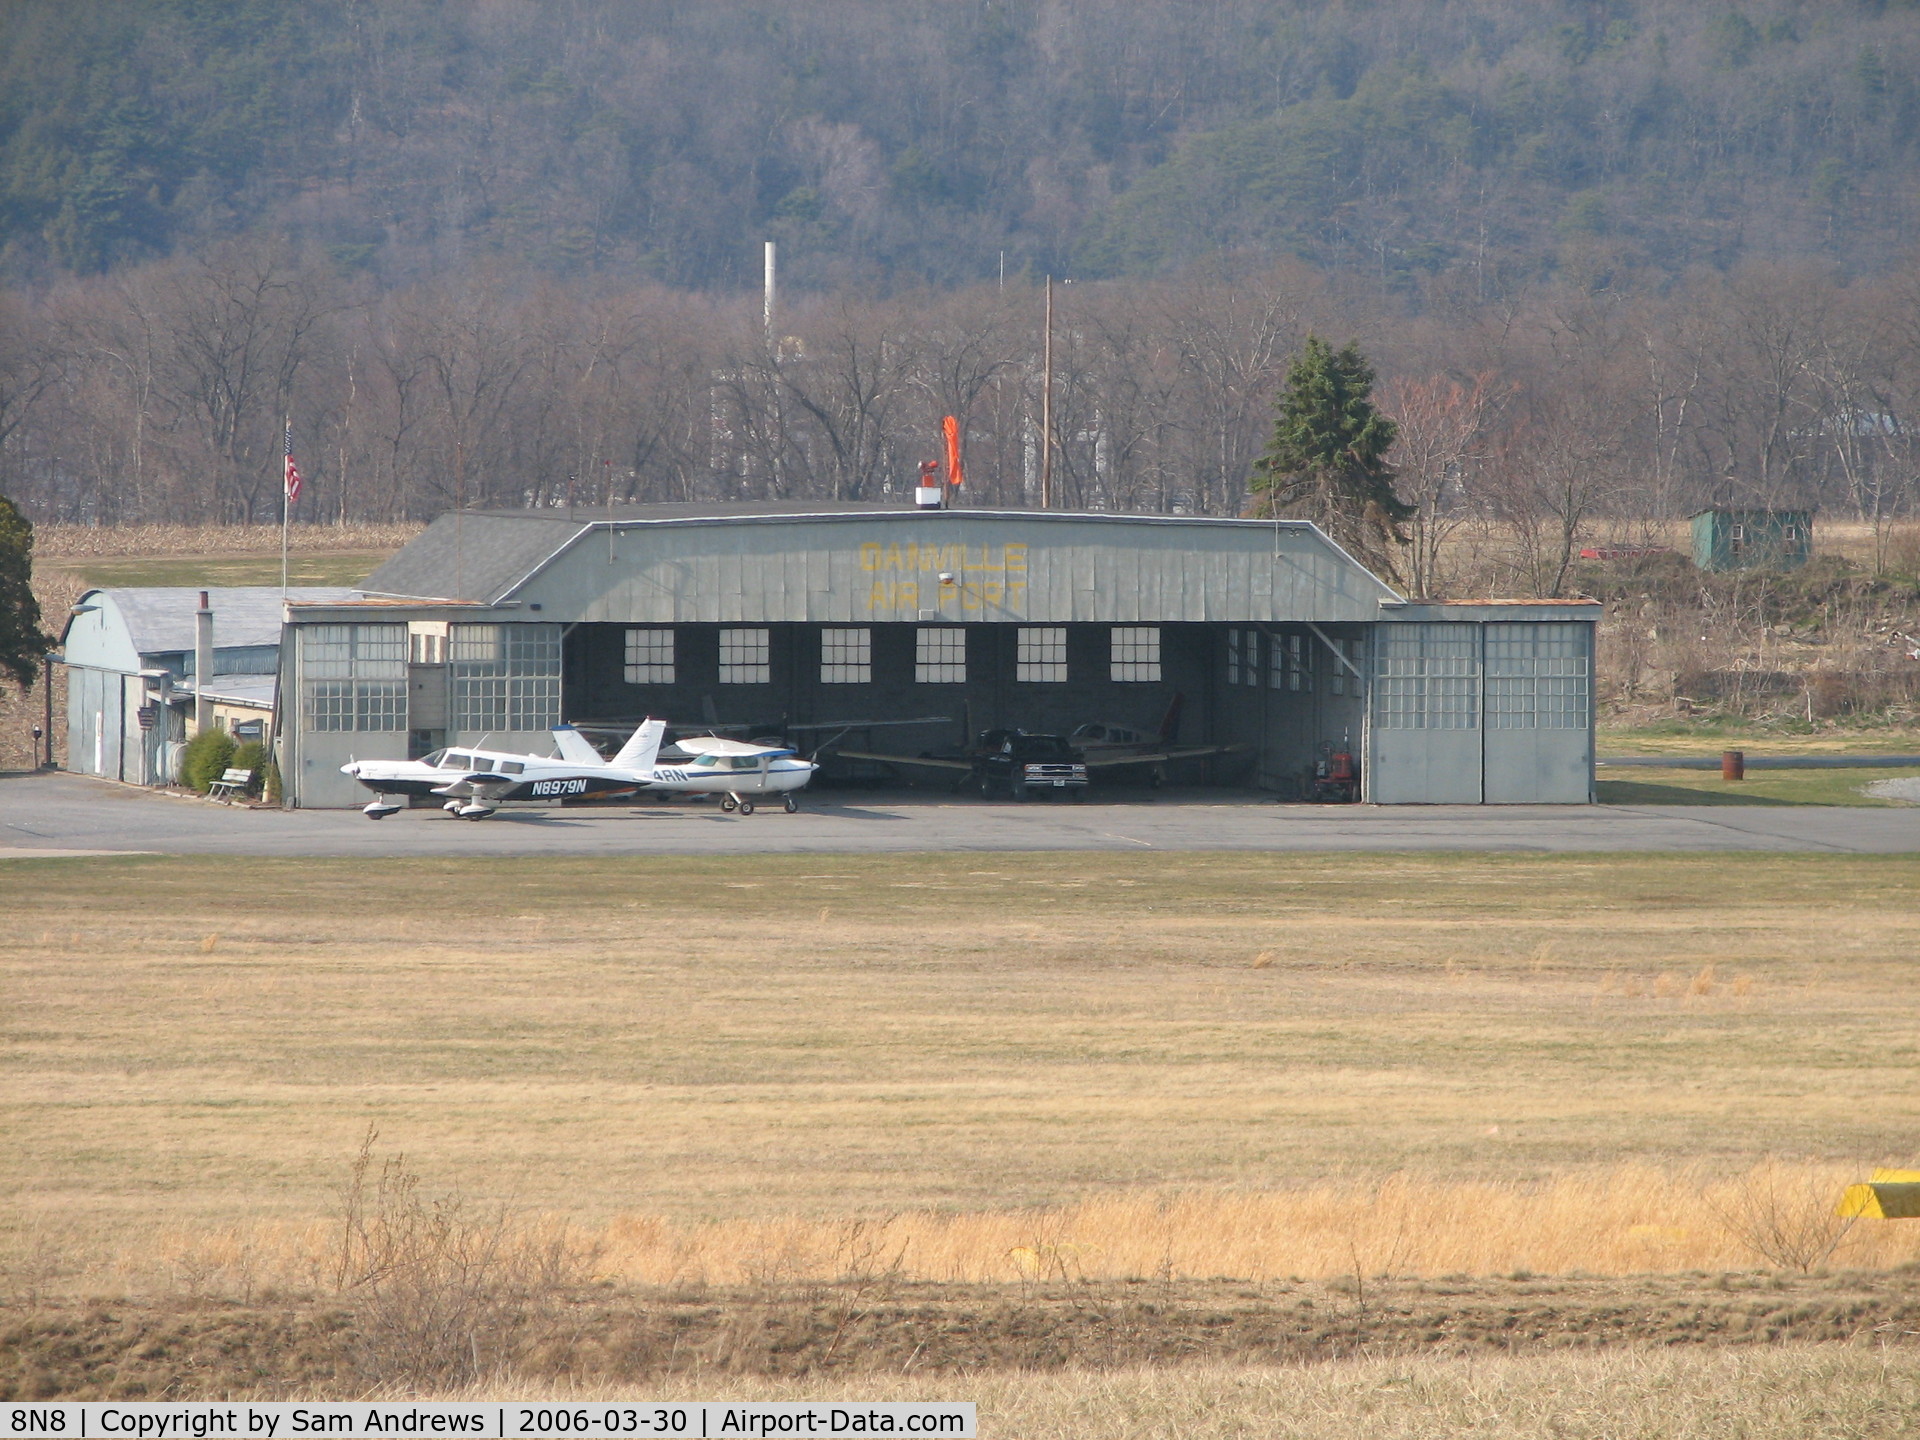 Danville Airport (8N8) - Looking down onto the Hanger and airport office from the runway.